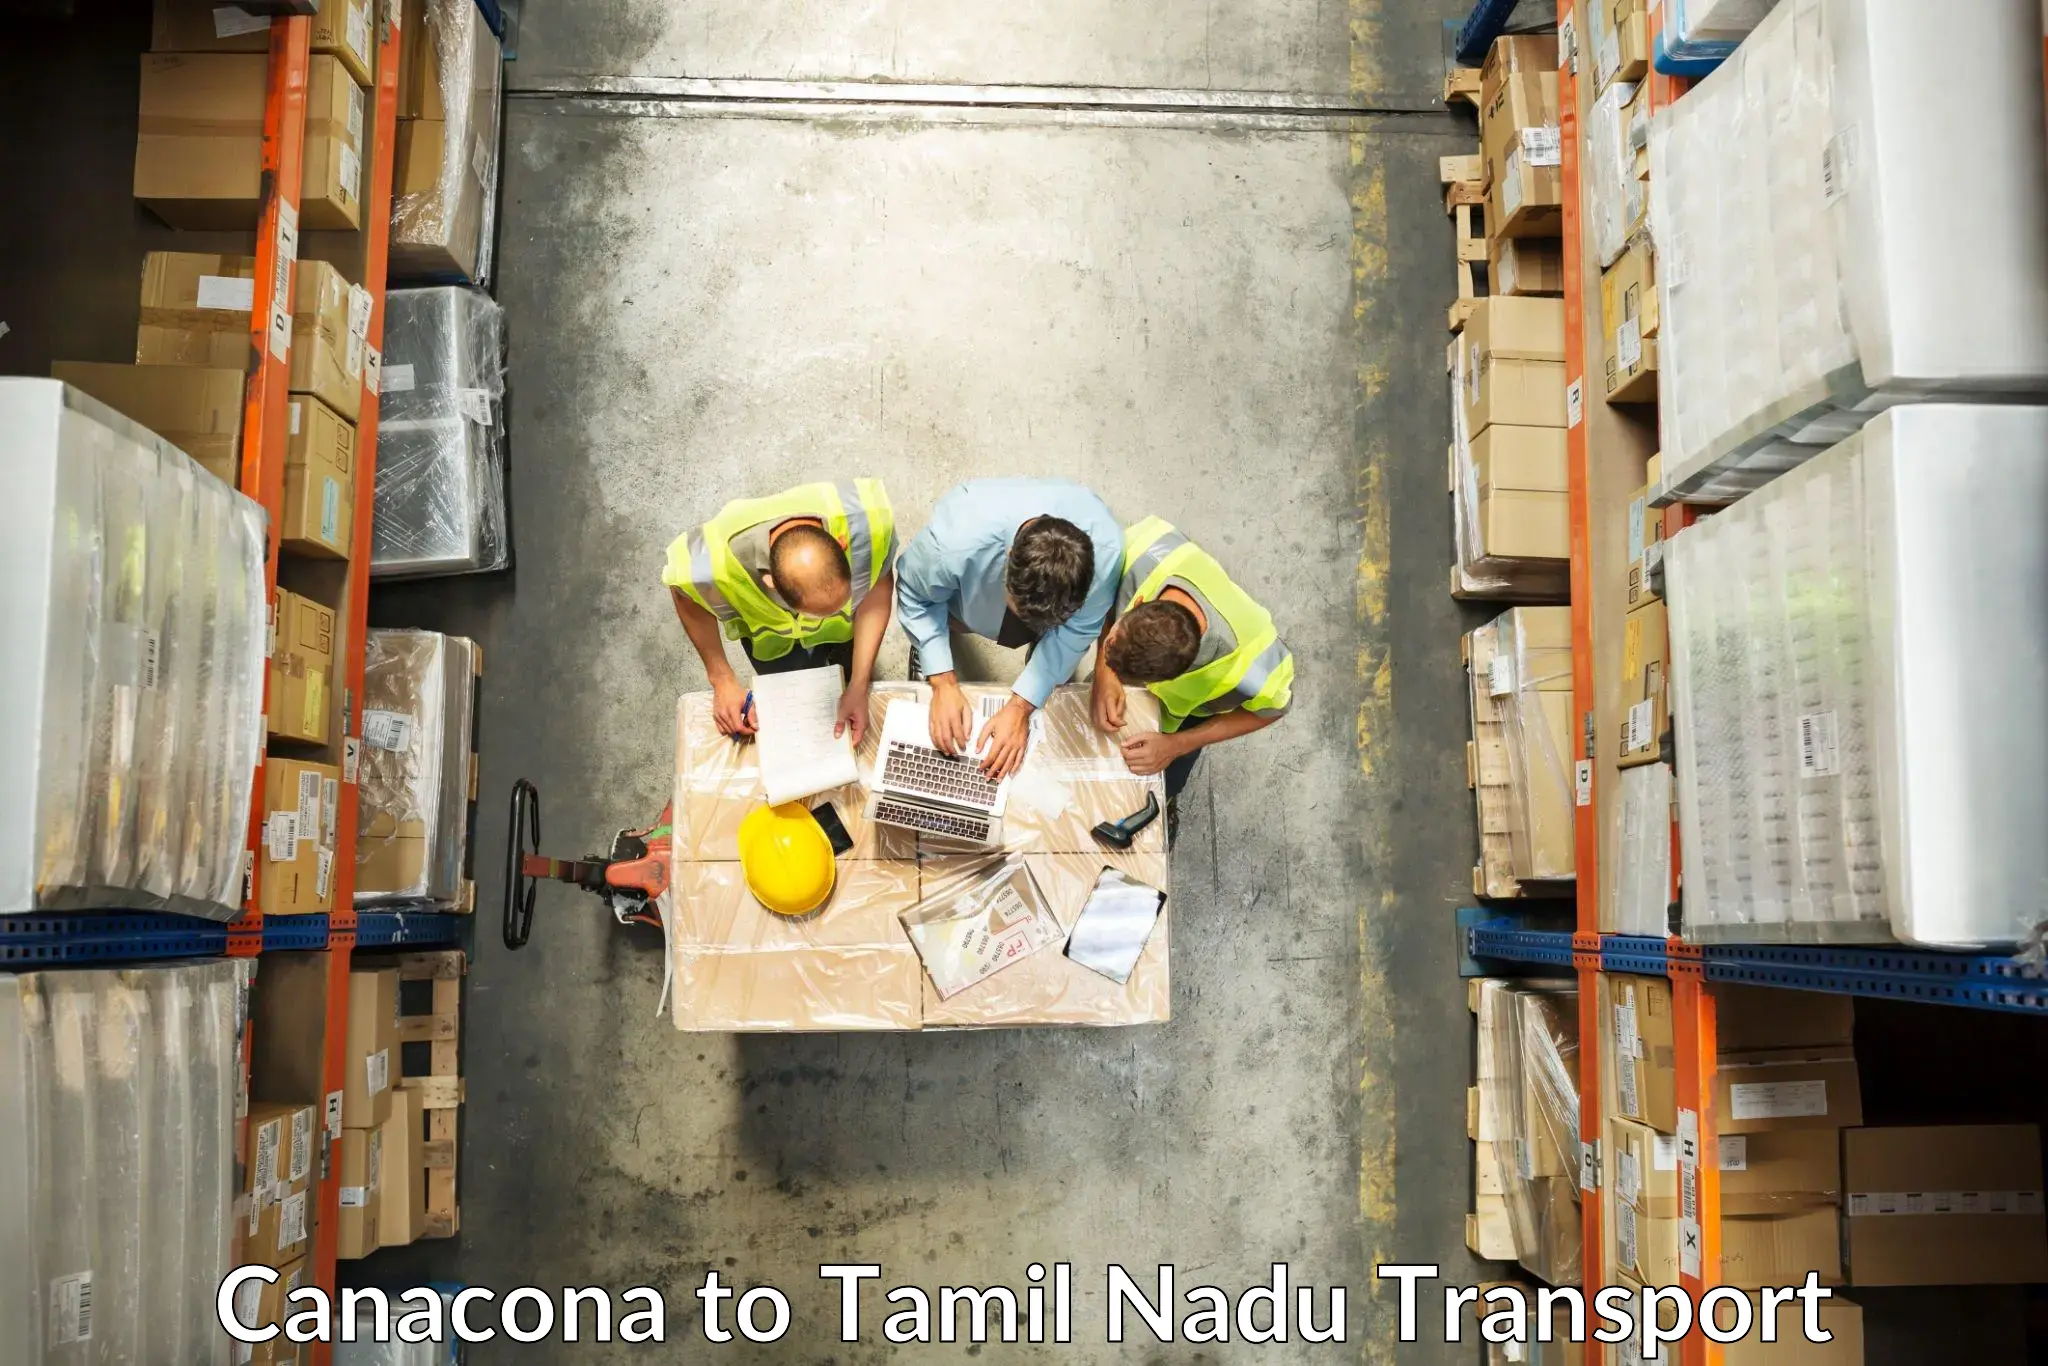 Commercial transport service Canacona to Ennore Port Chennai